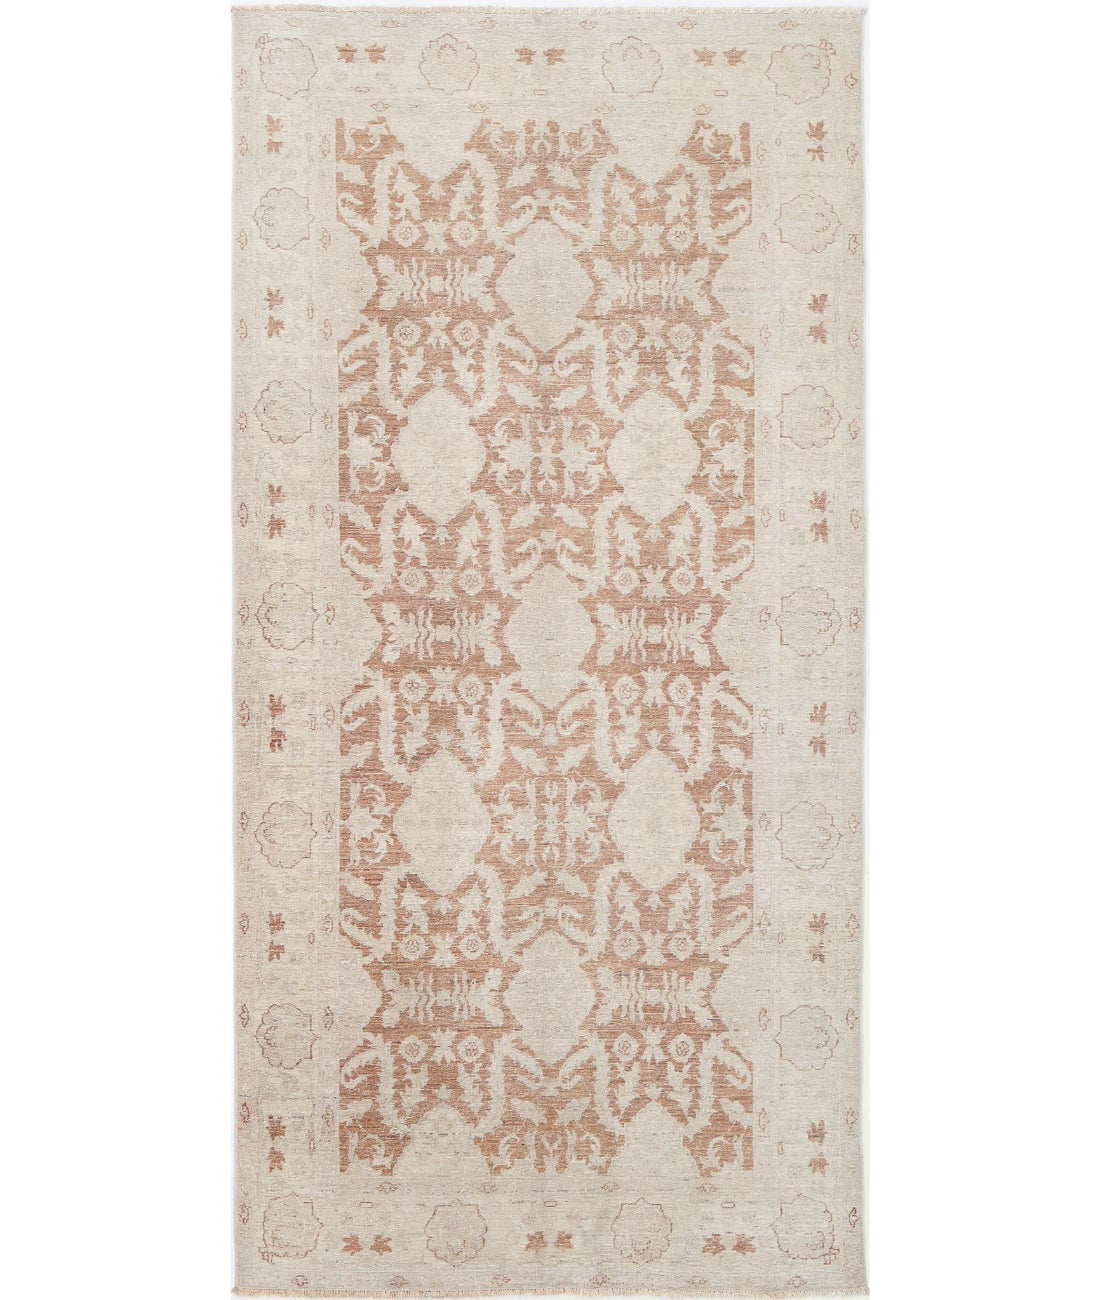 Hand Knotted Serenity Wool Rug - 4'8'' x 9'8'' 4'8'' x 9'8'' (140 X 290) / Tan / Ivory